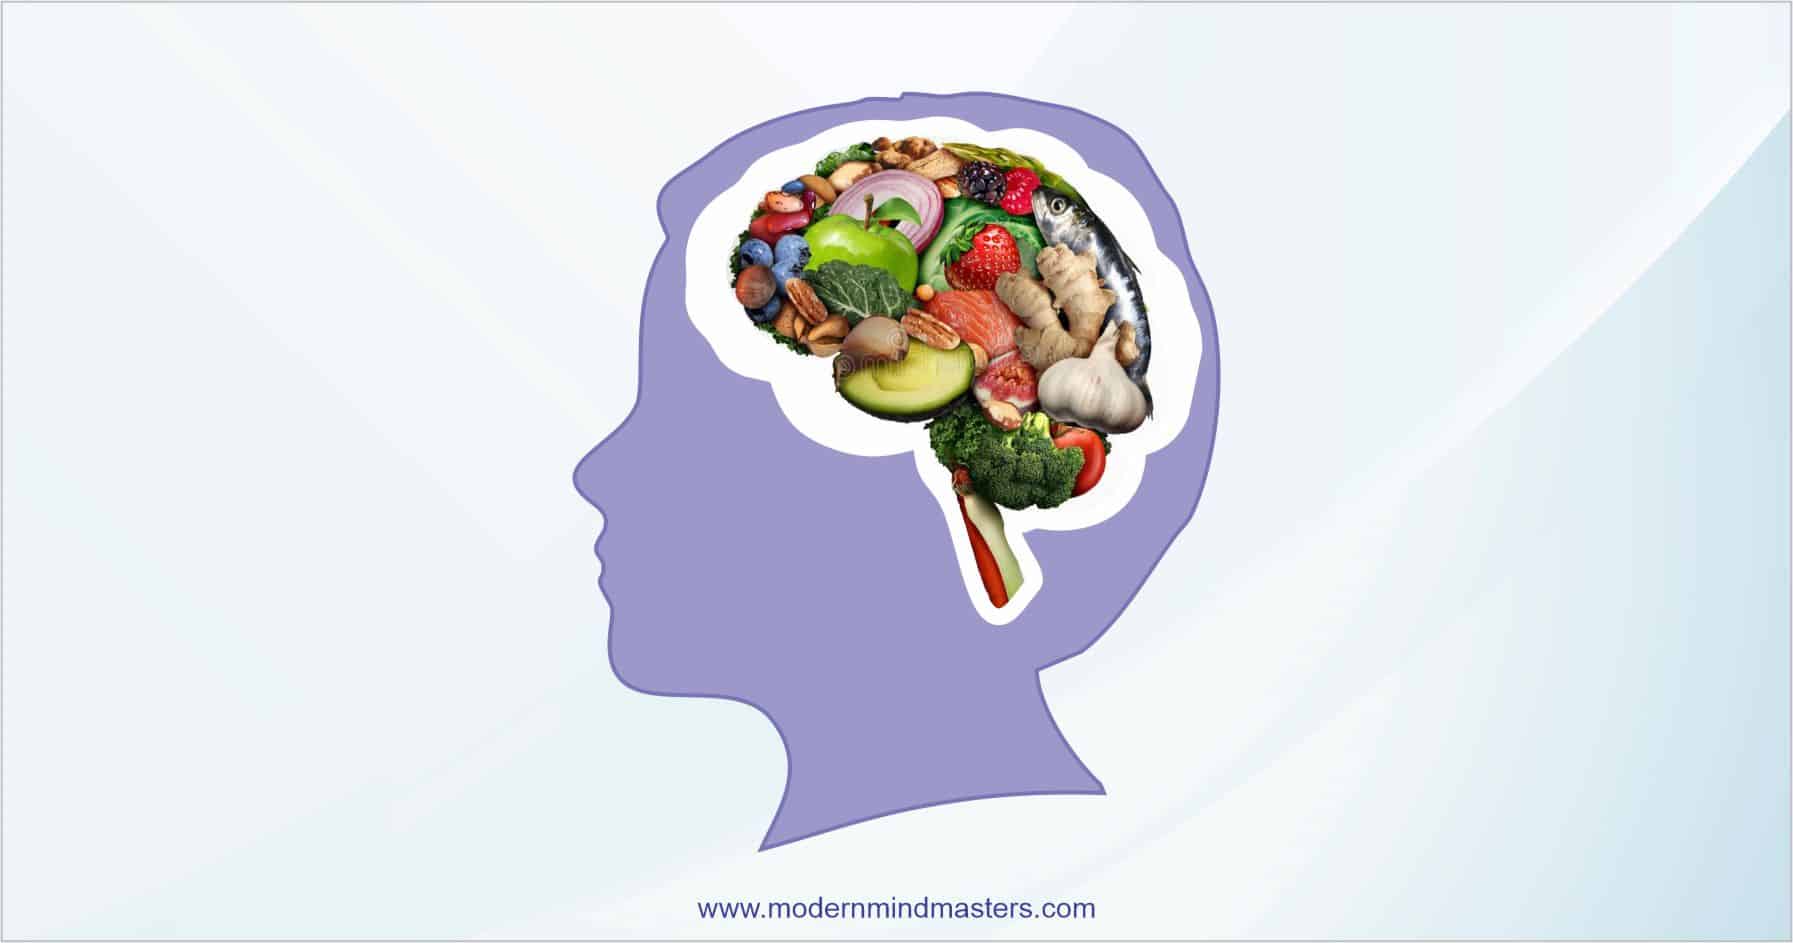 Nutritional Psychiatry food the body and brain needs